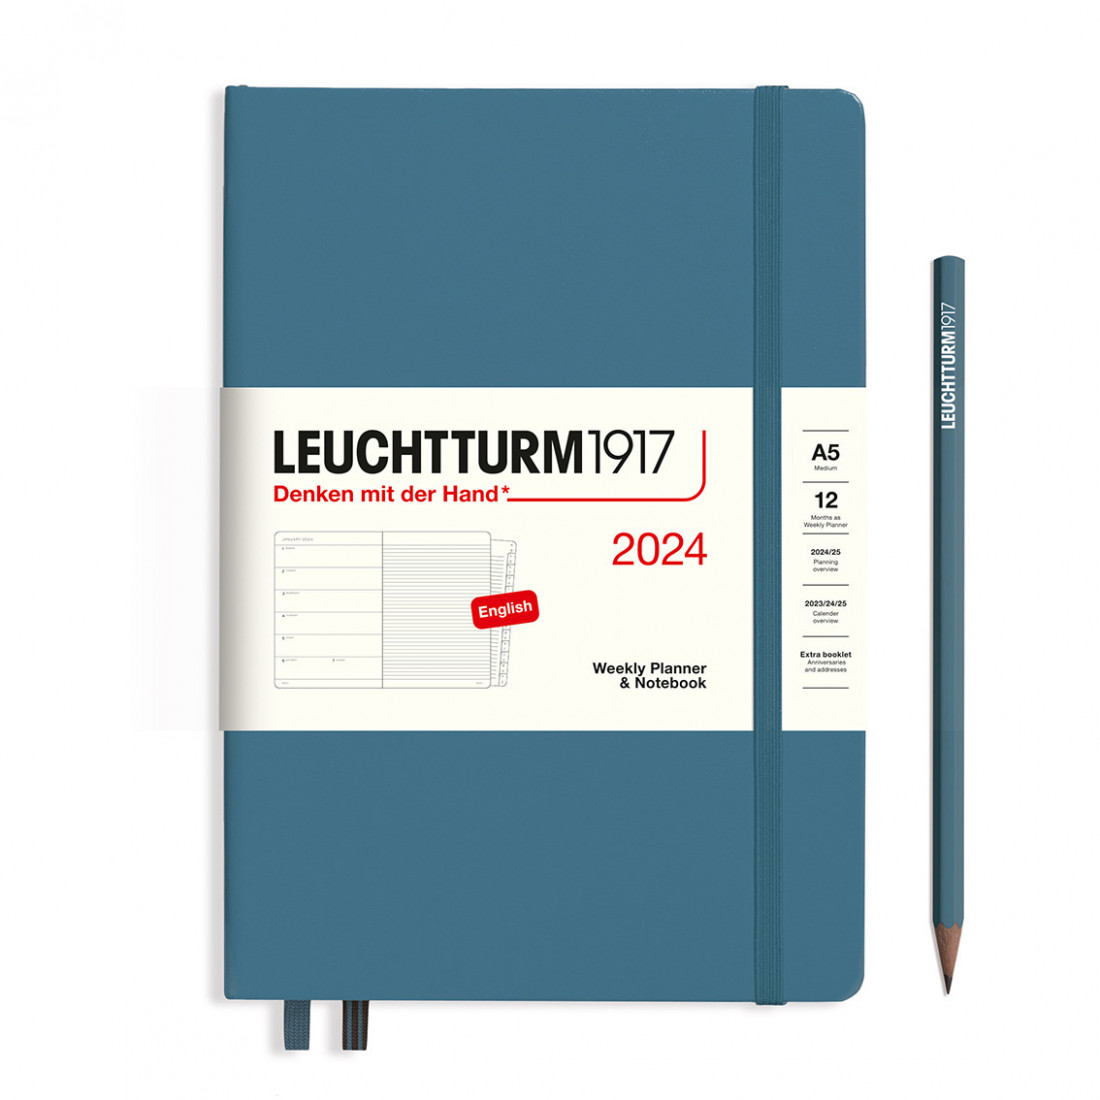 Leuchtturm 1917 Weekly Planner and Notebook 2024 Stone Blue Medium A5 Hard Cover